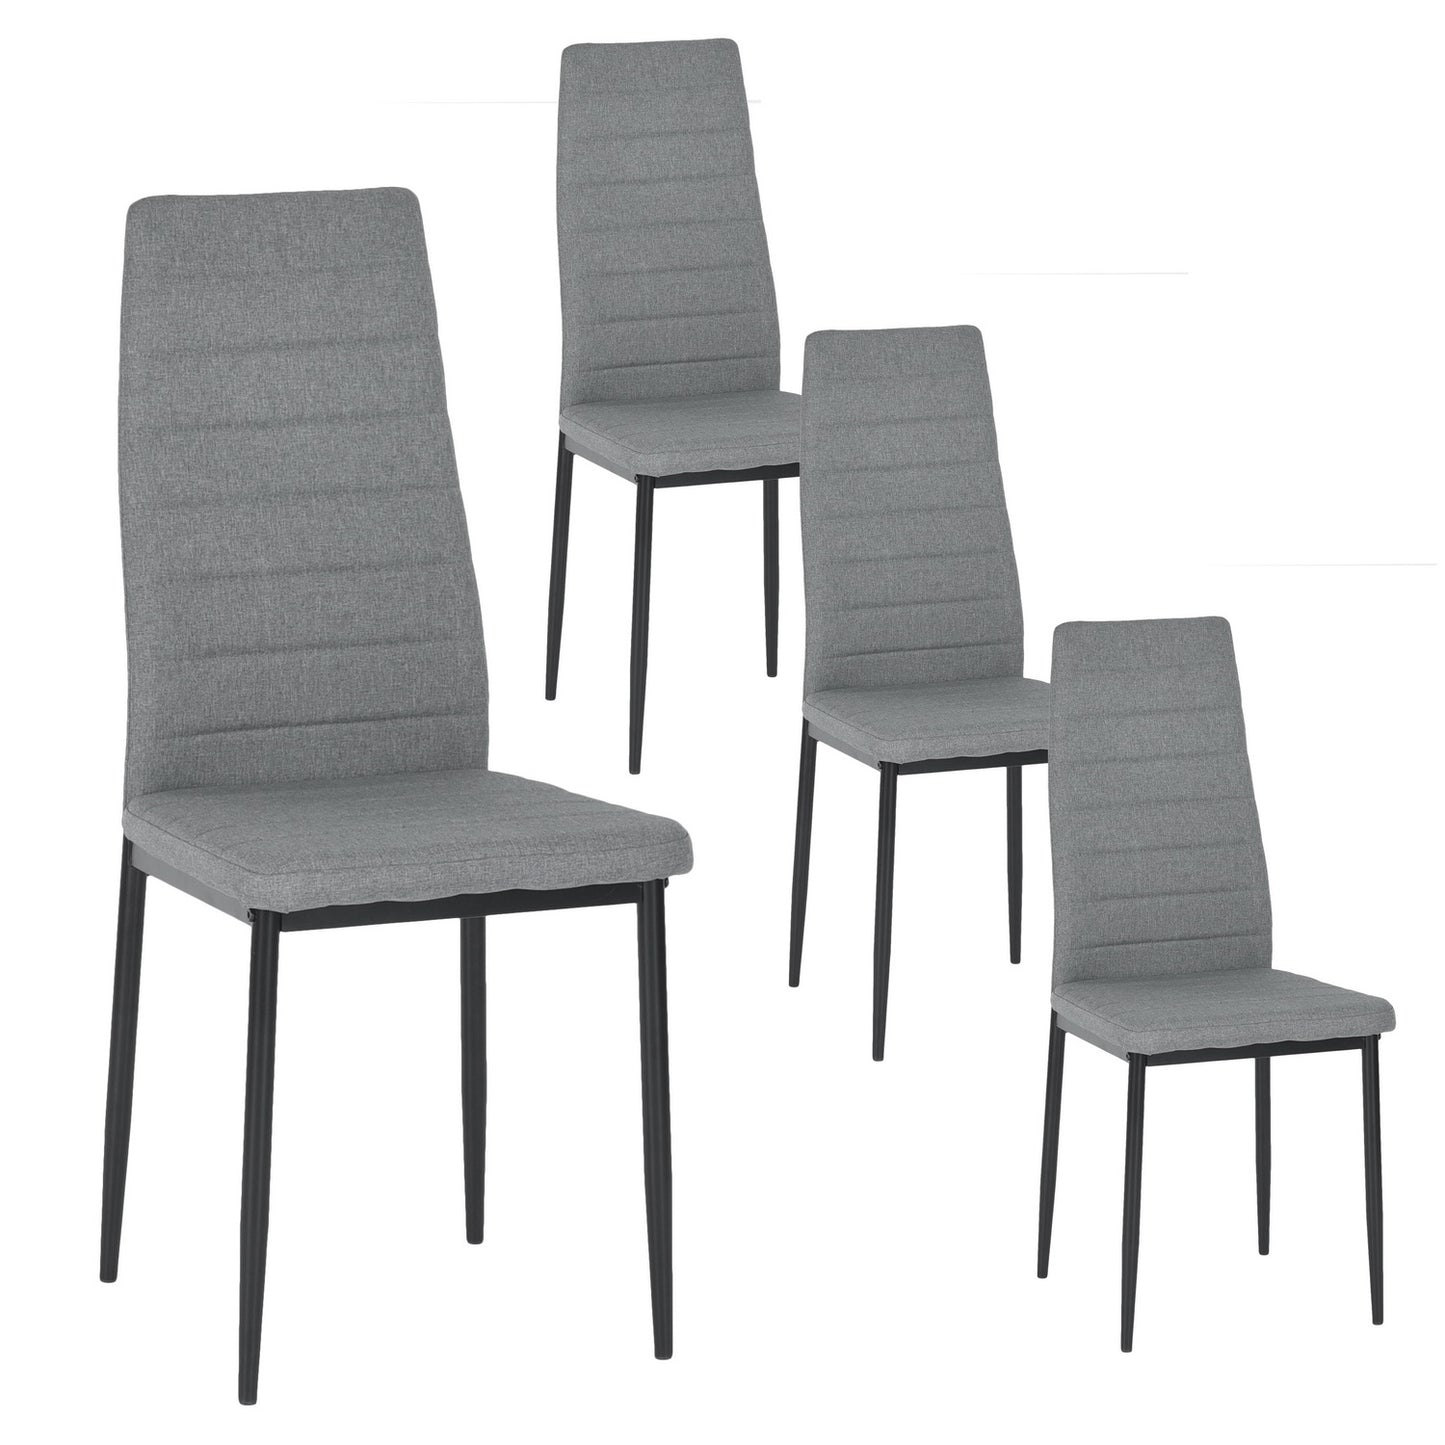 ANN Modern Upholstered Dining Chairs(Set of 4) - Beige/Brown/Gray